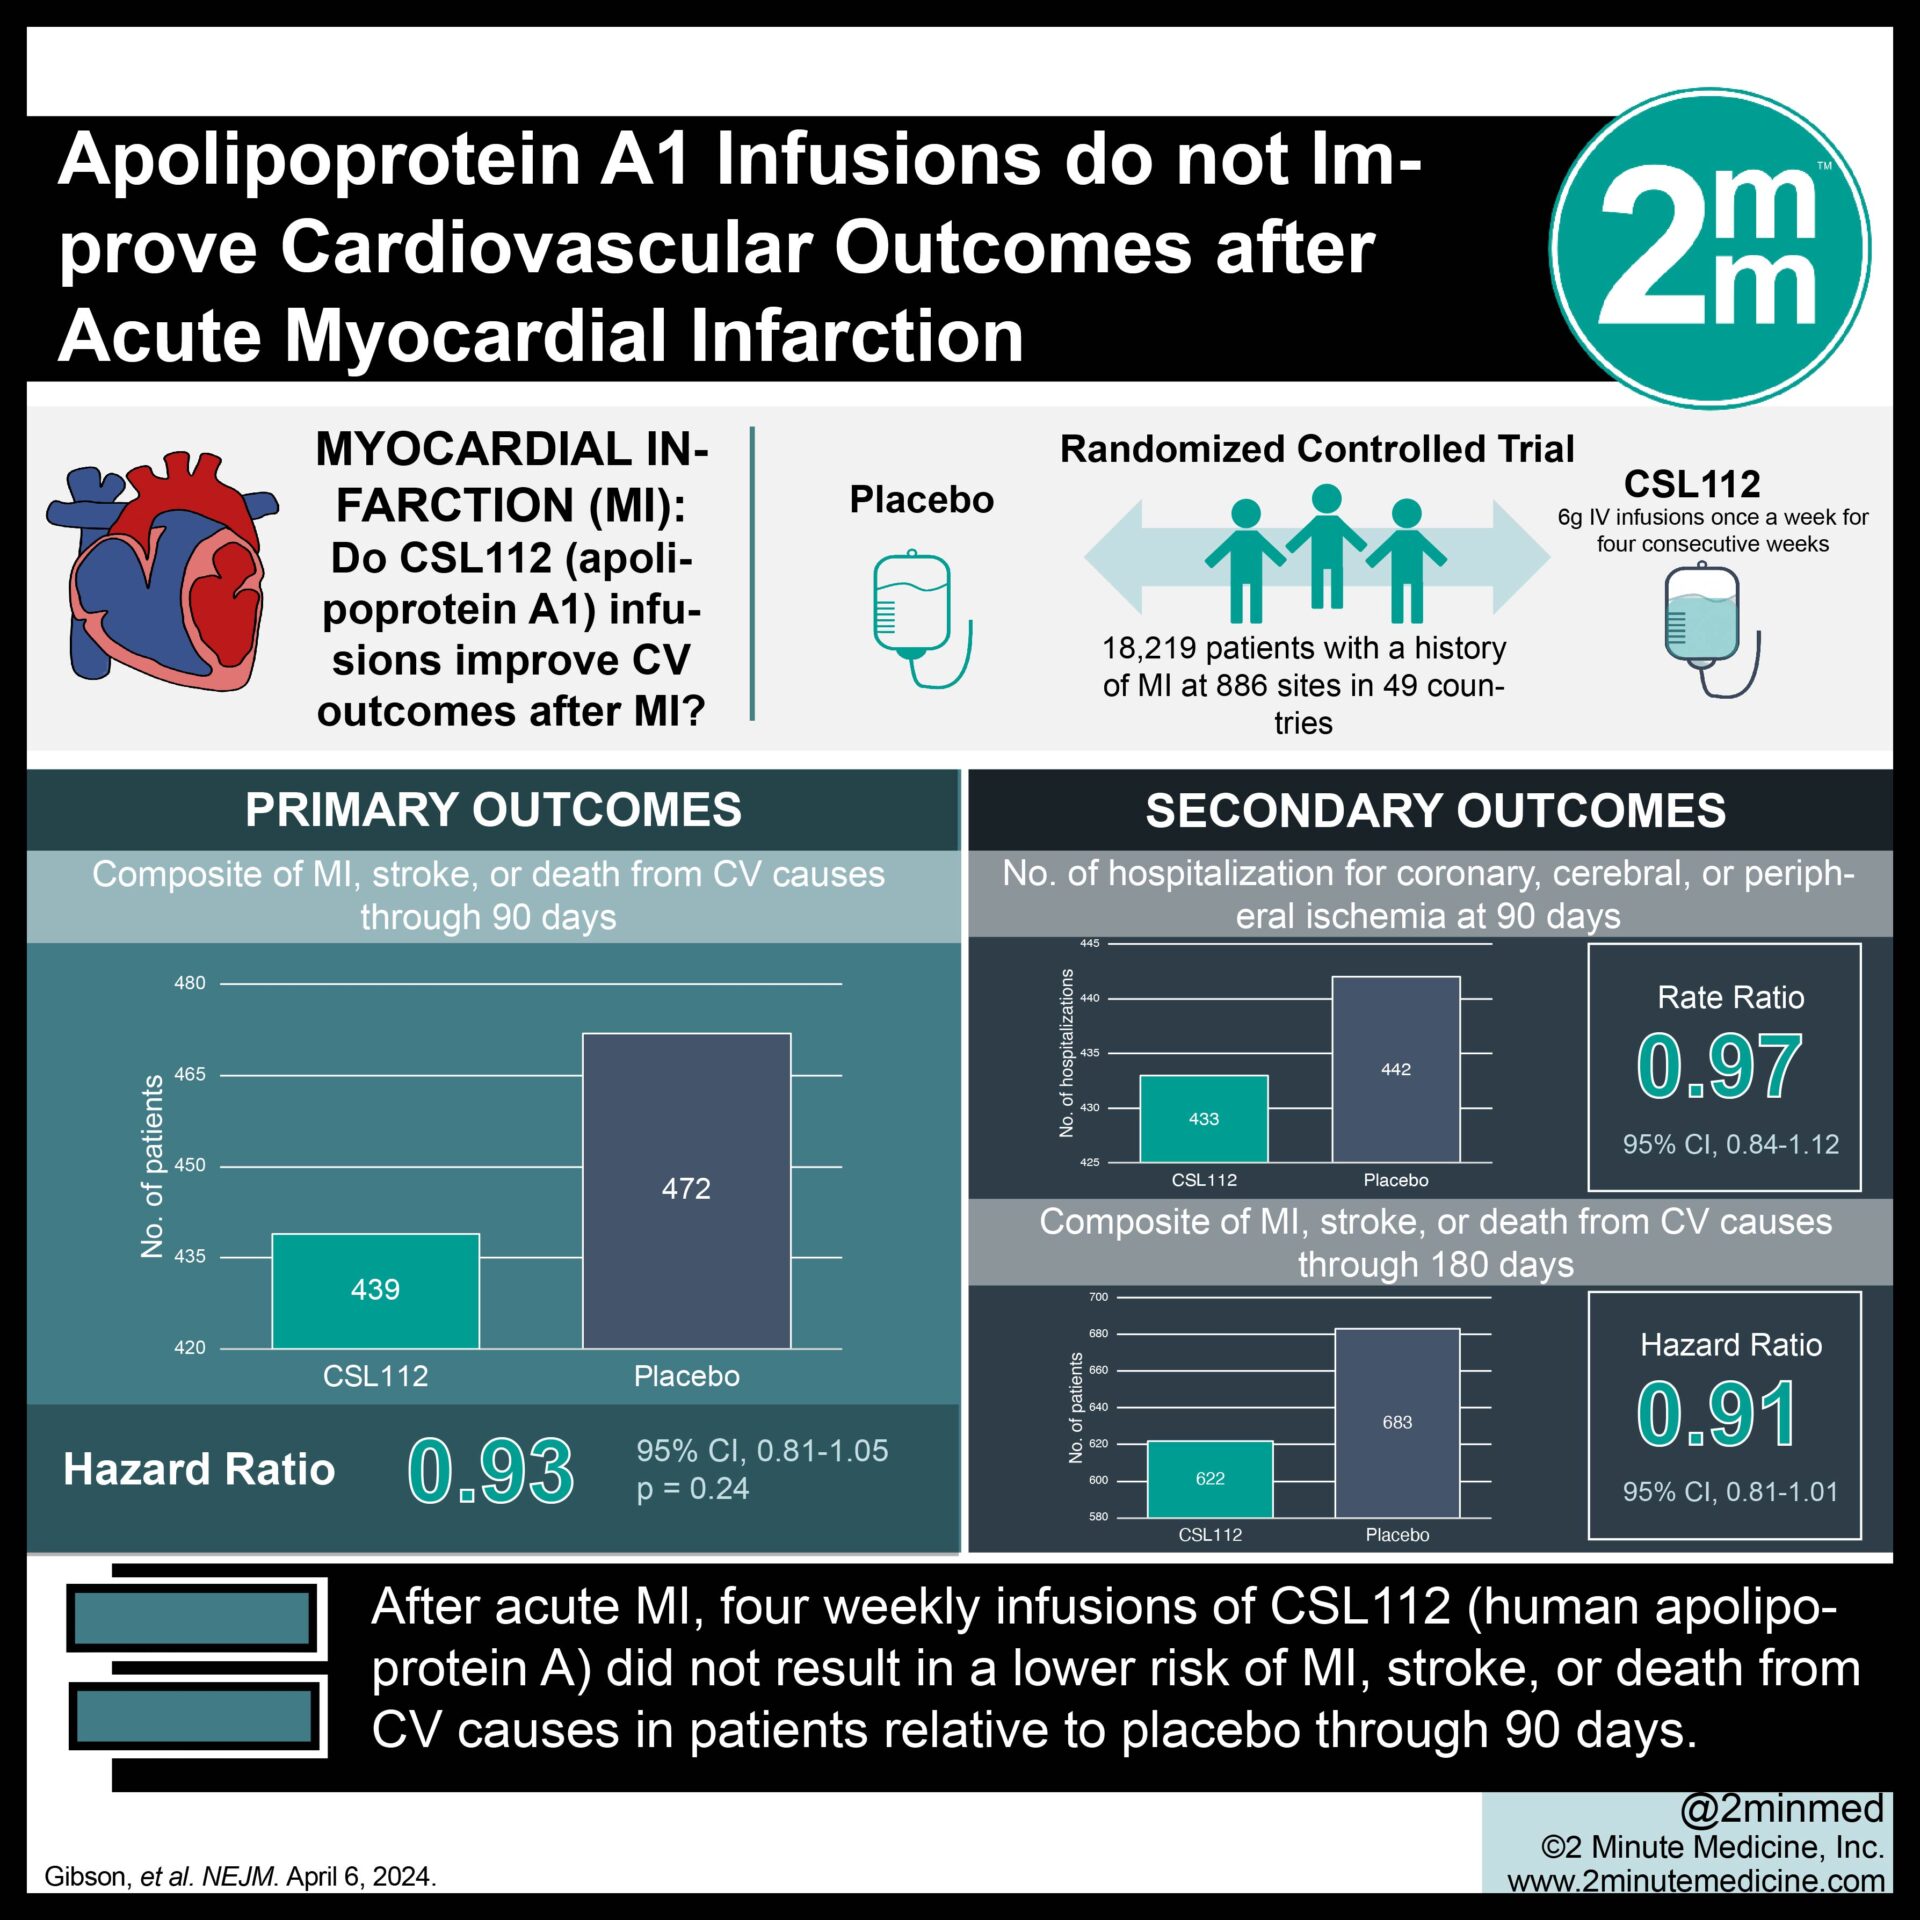 #VisualAbstract: Apolipoprotein A1 Infusions do not Improve Cardiovascular Outcomes after Acute Myocardial Infarction